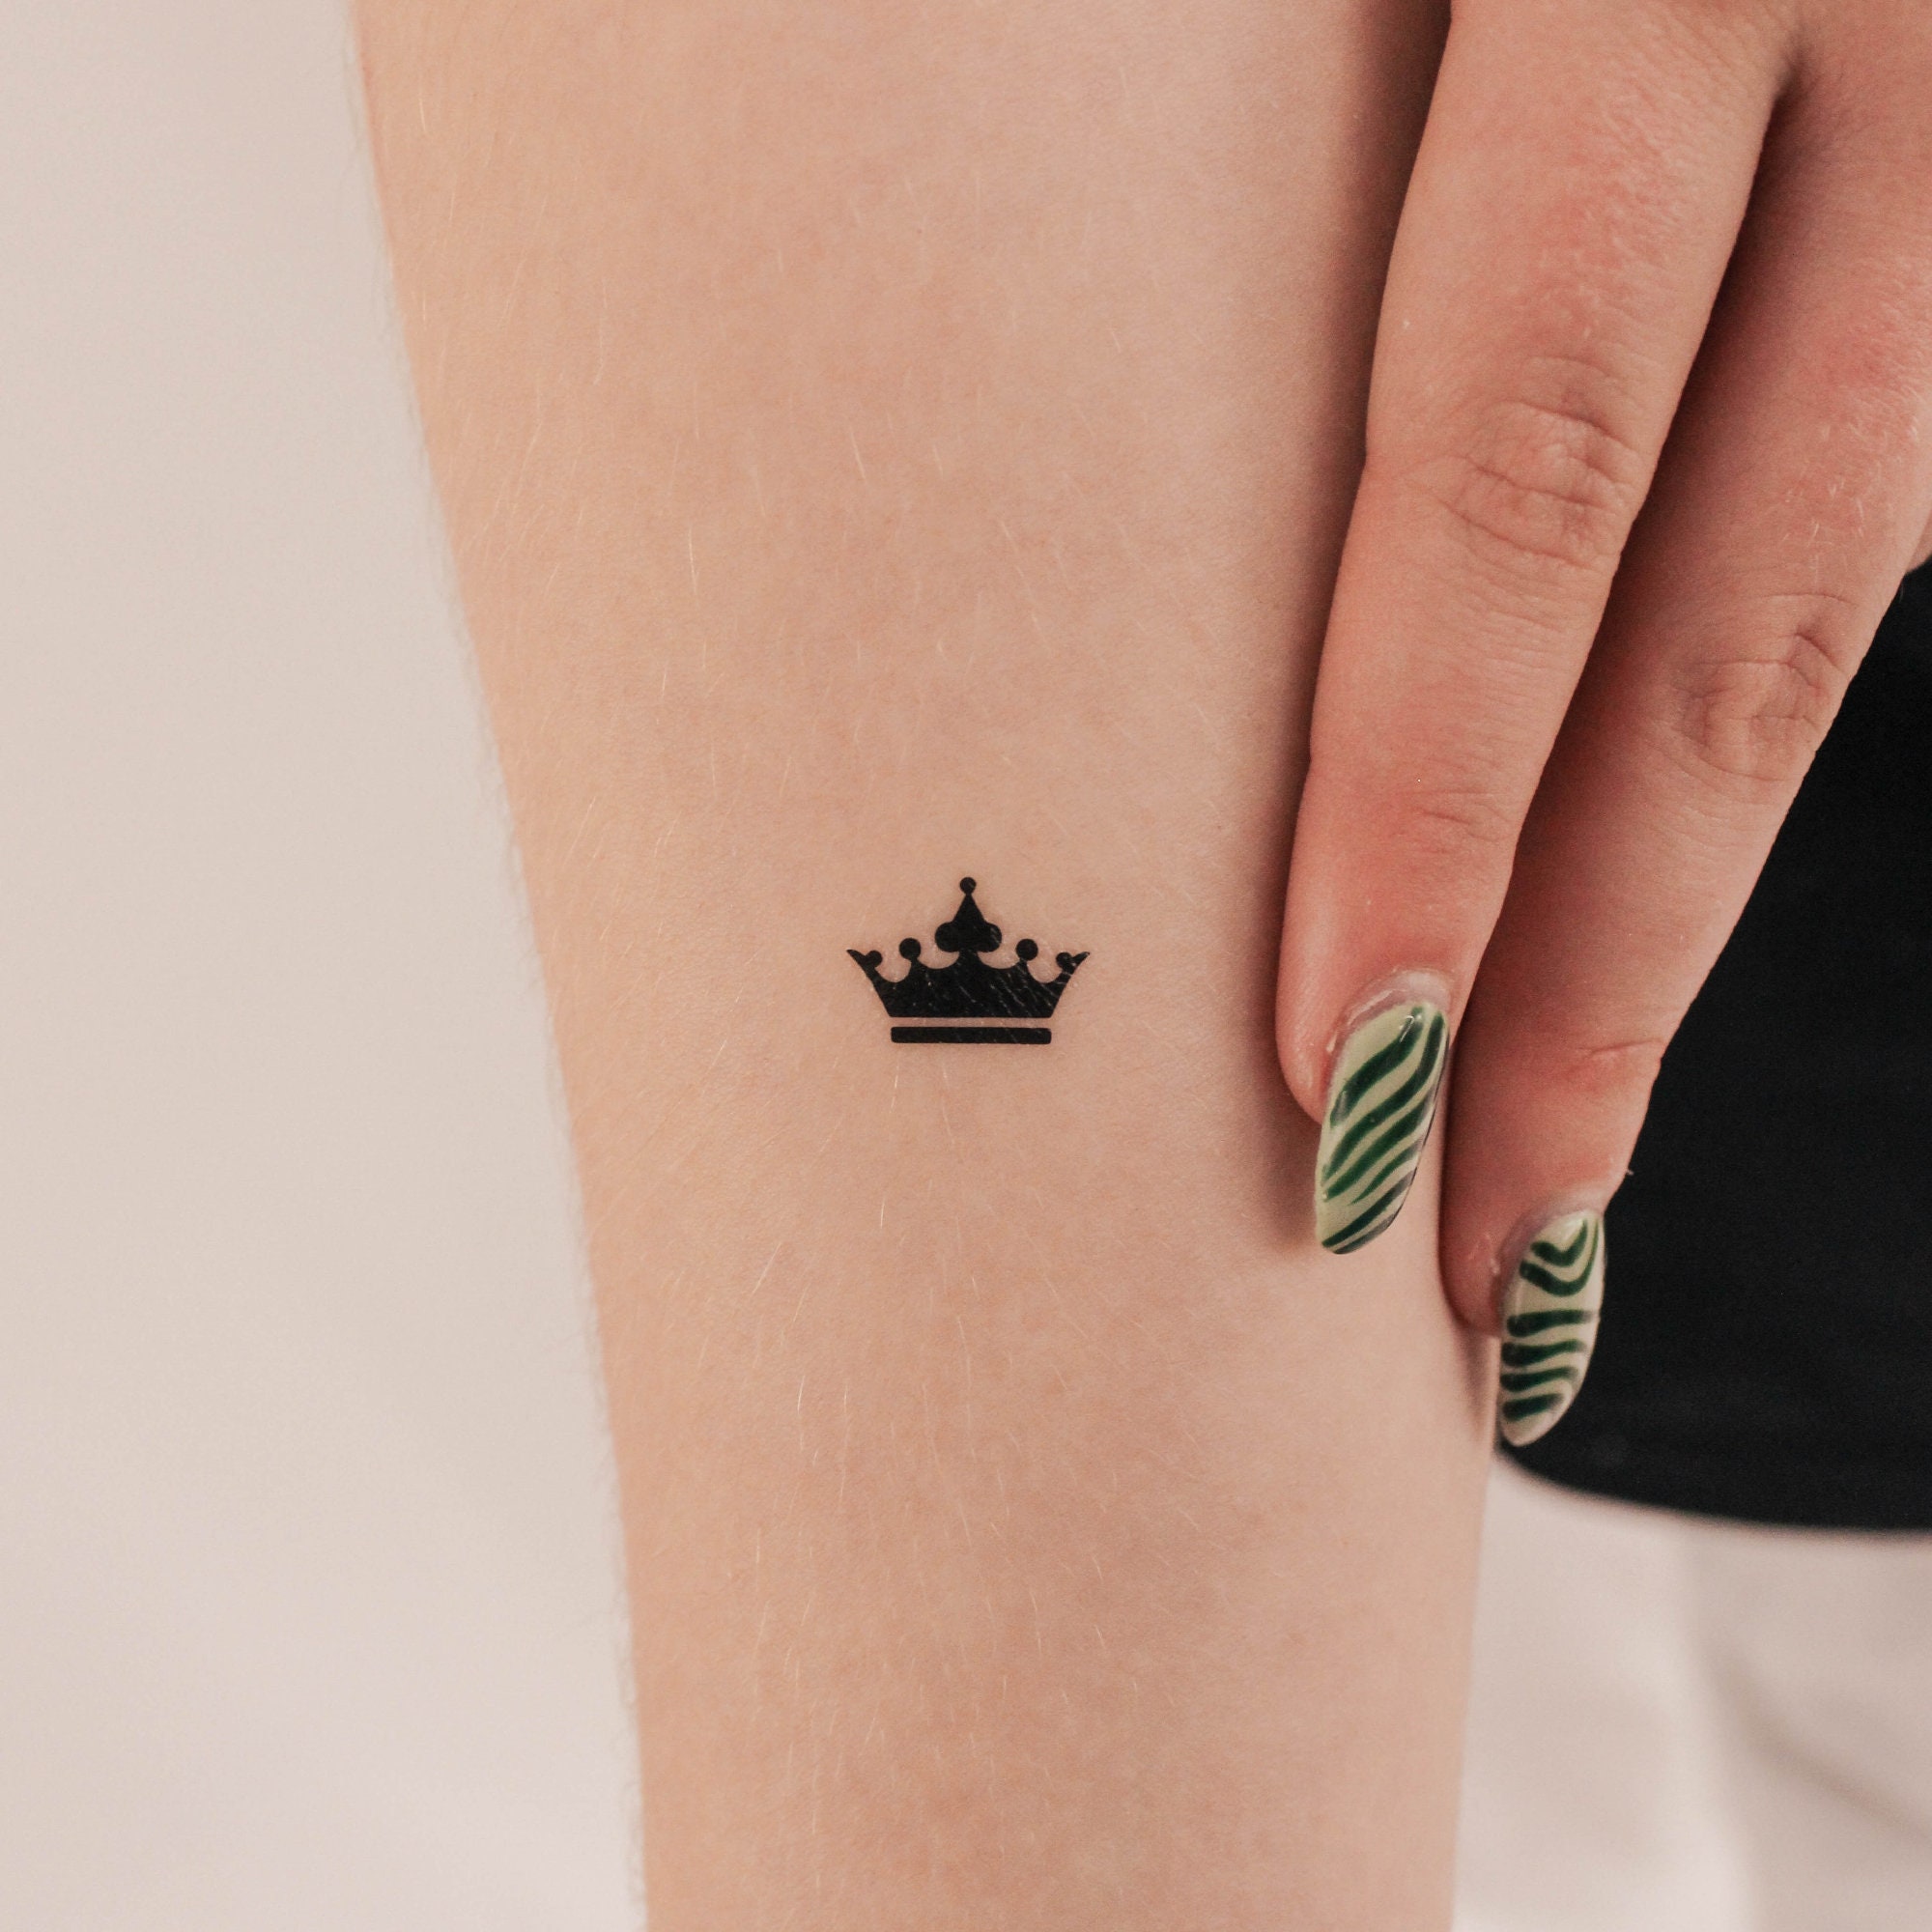 Temporary tattoo -Queen Bee tattoo (approx 3